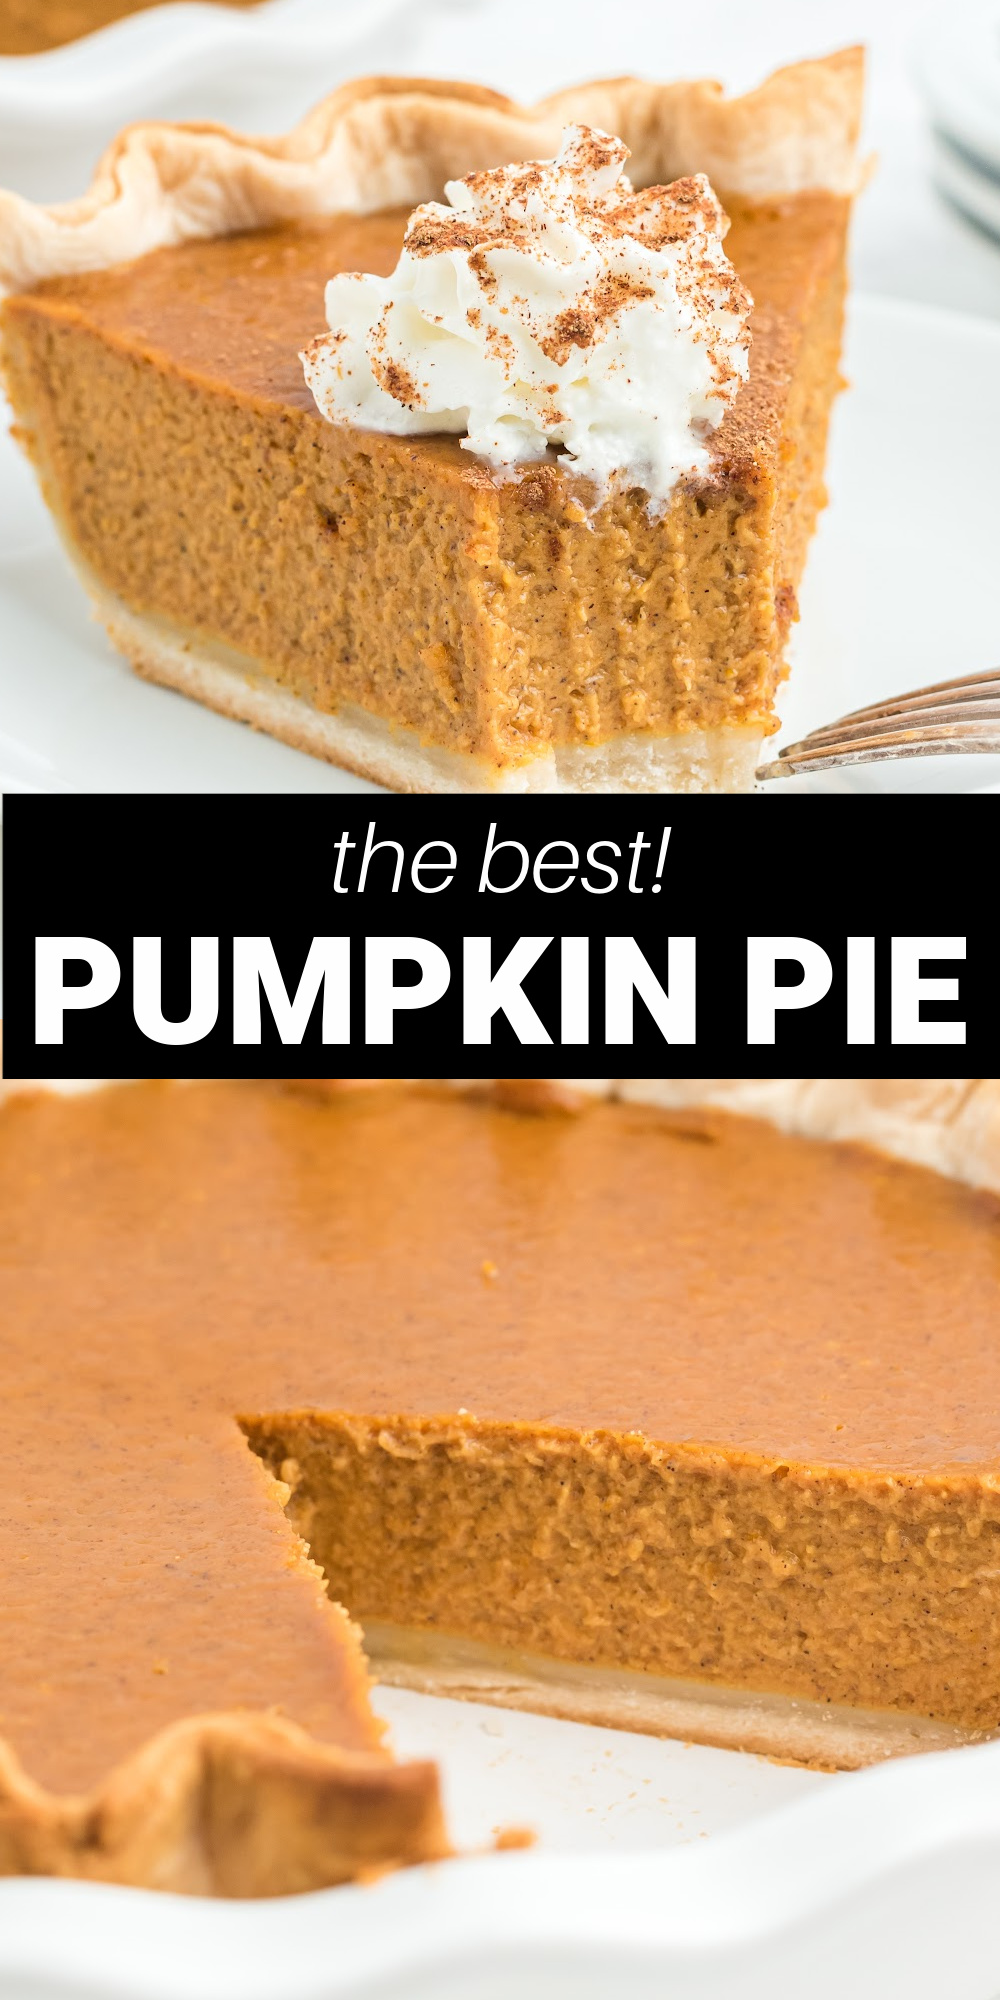 This pumpkin pie is the absolute best recipe for pumpkin pie. It's a classic with creamy pumpkin center filled with cinnamon and pumpkin pie spices that make your kitchen smell like Fall and is perfect for the holiday season.